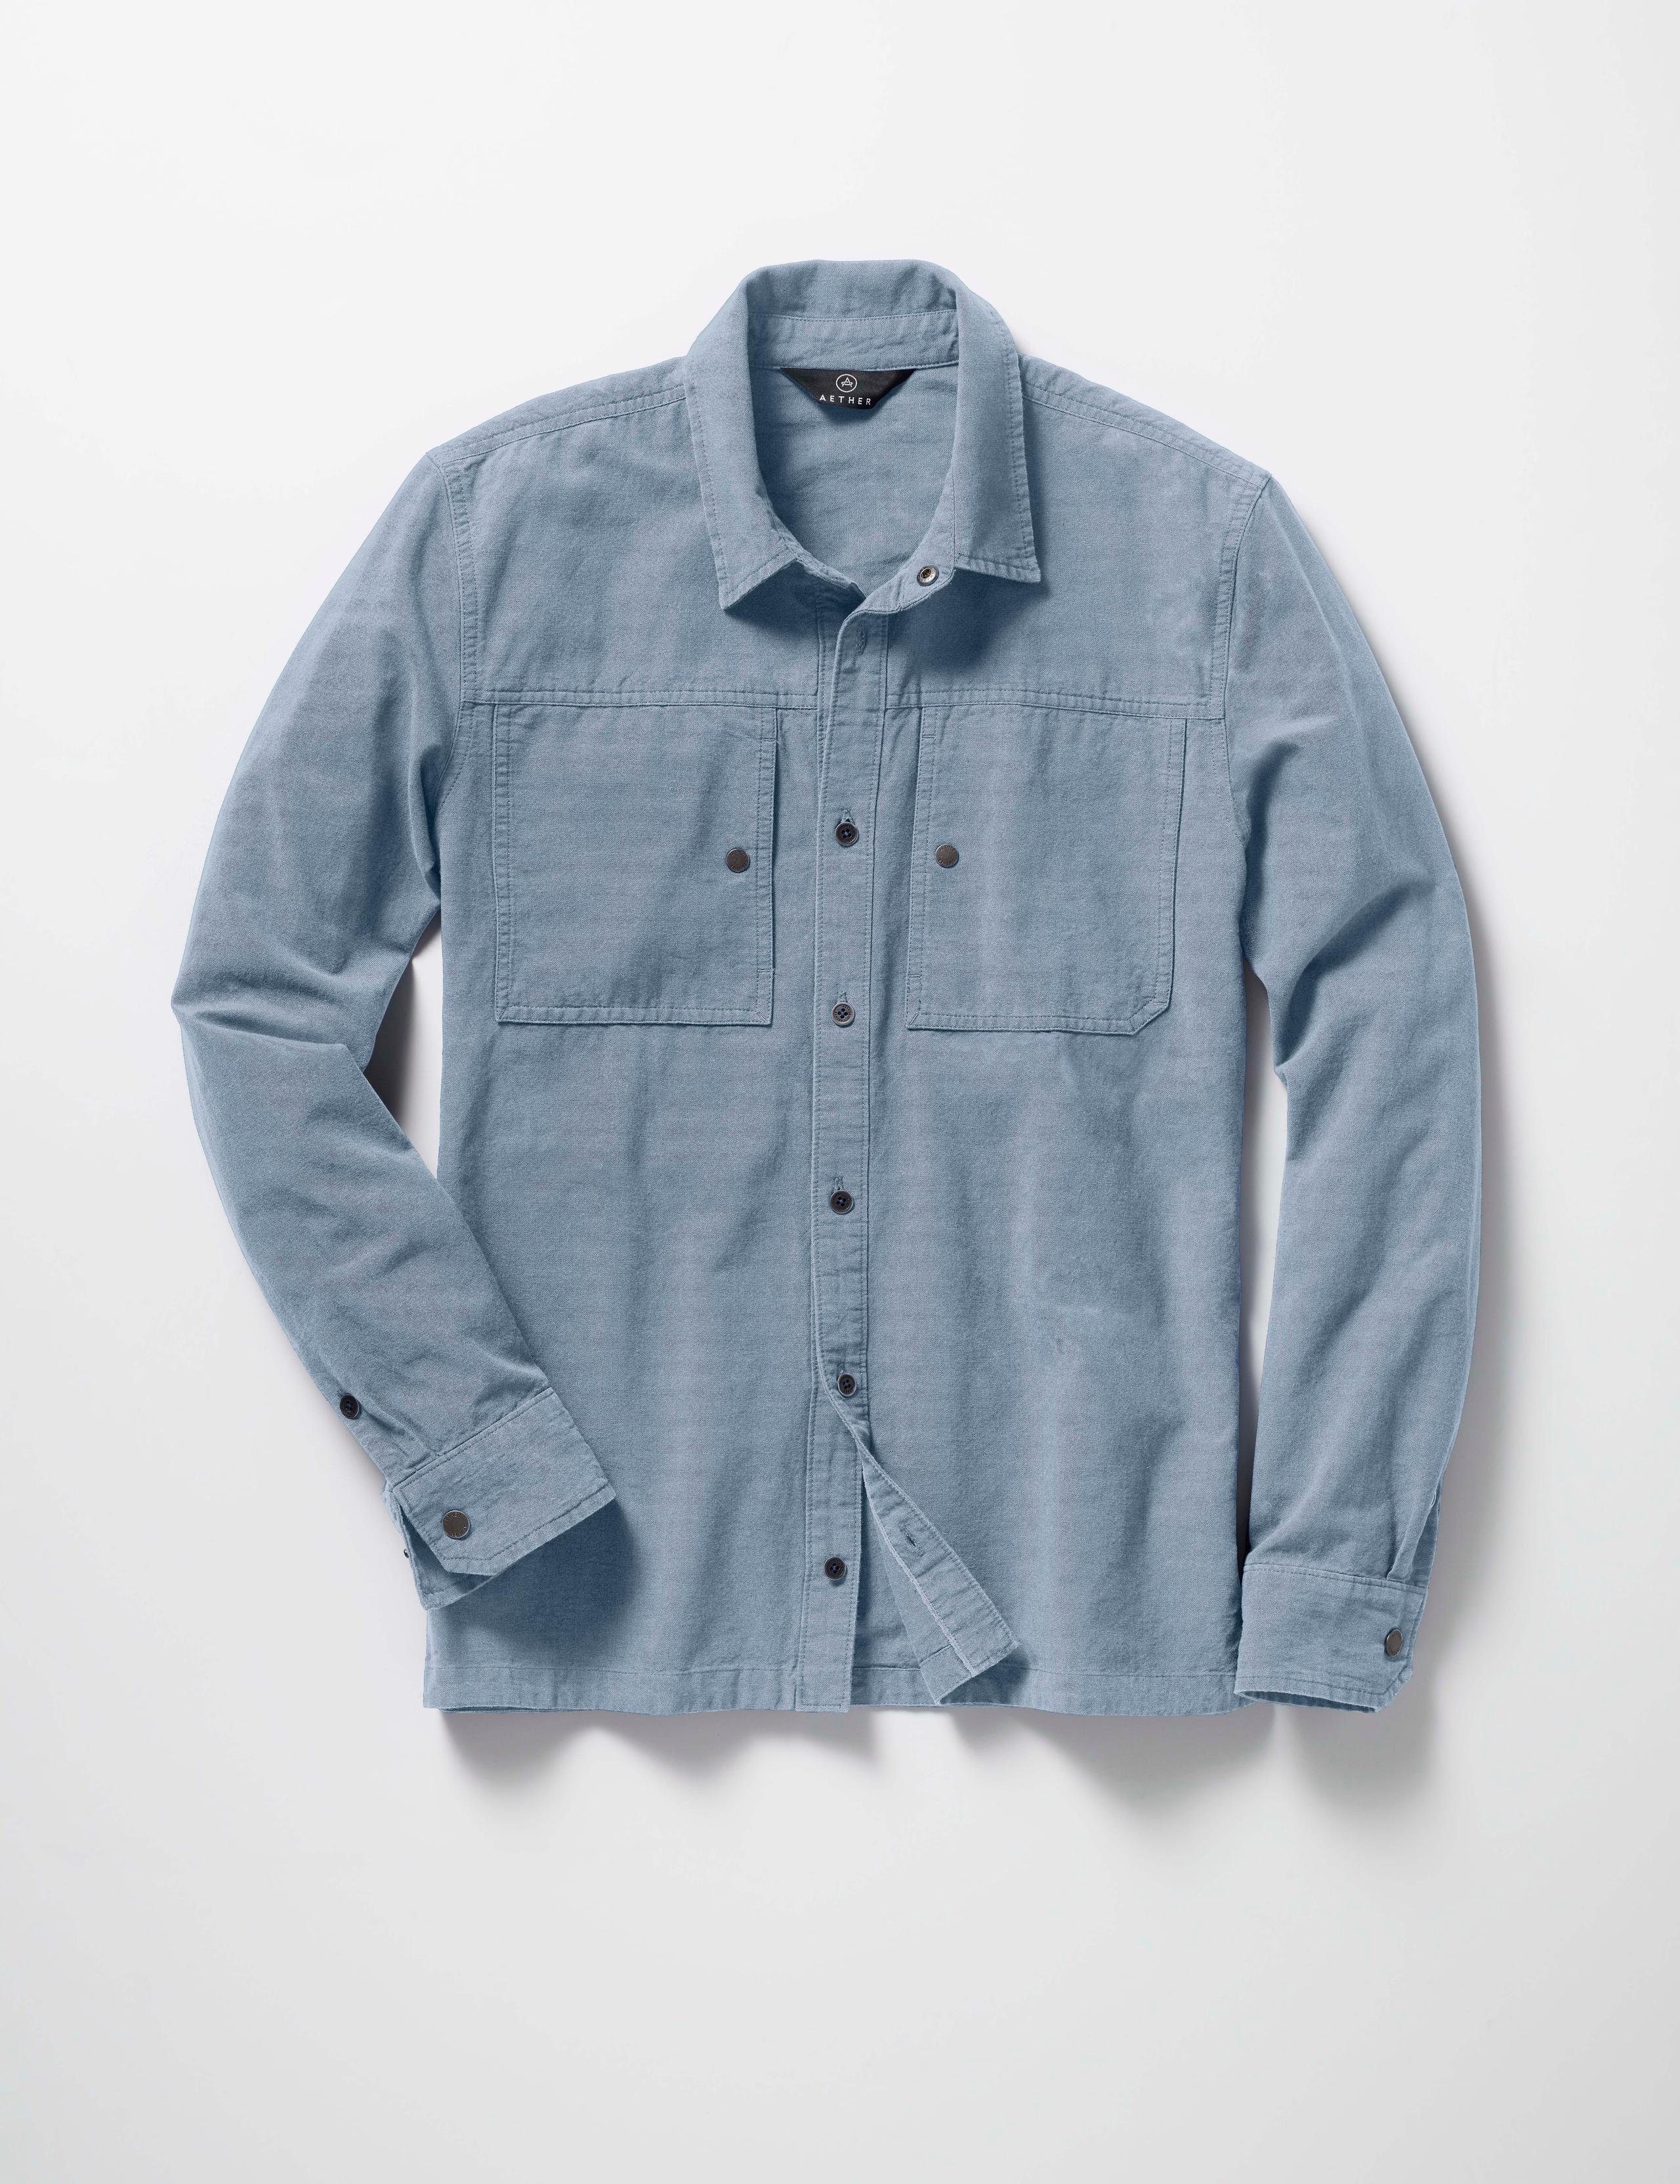 Detail of Chambray Button-Down buttons and front placket